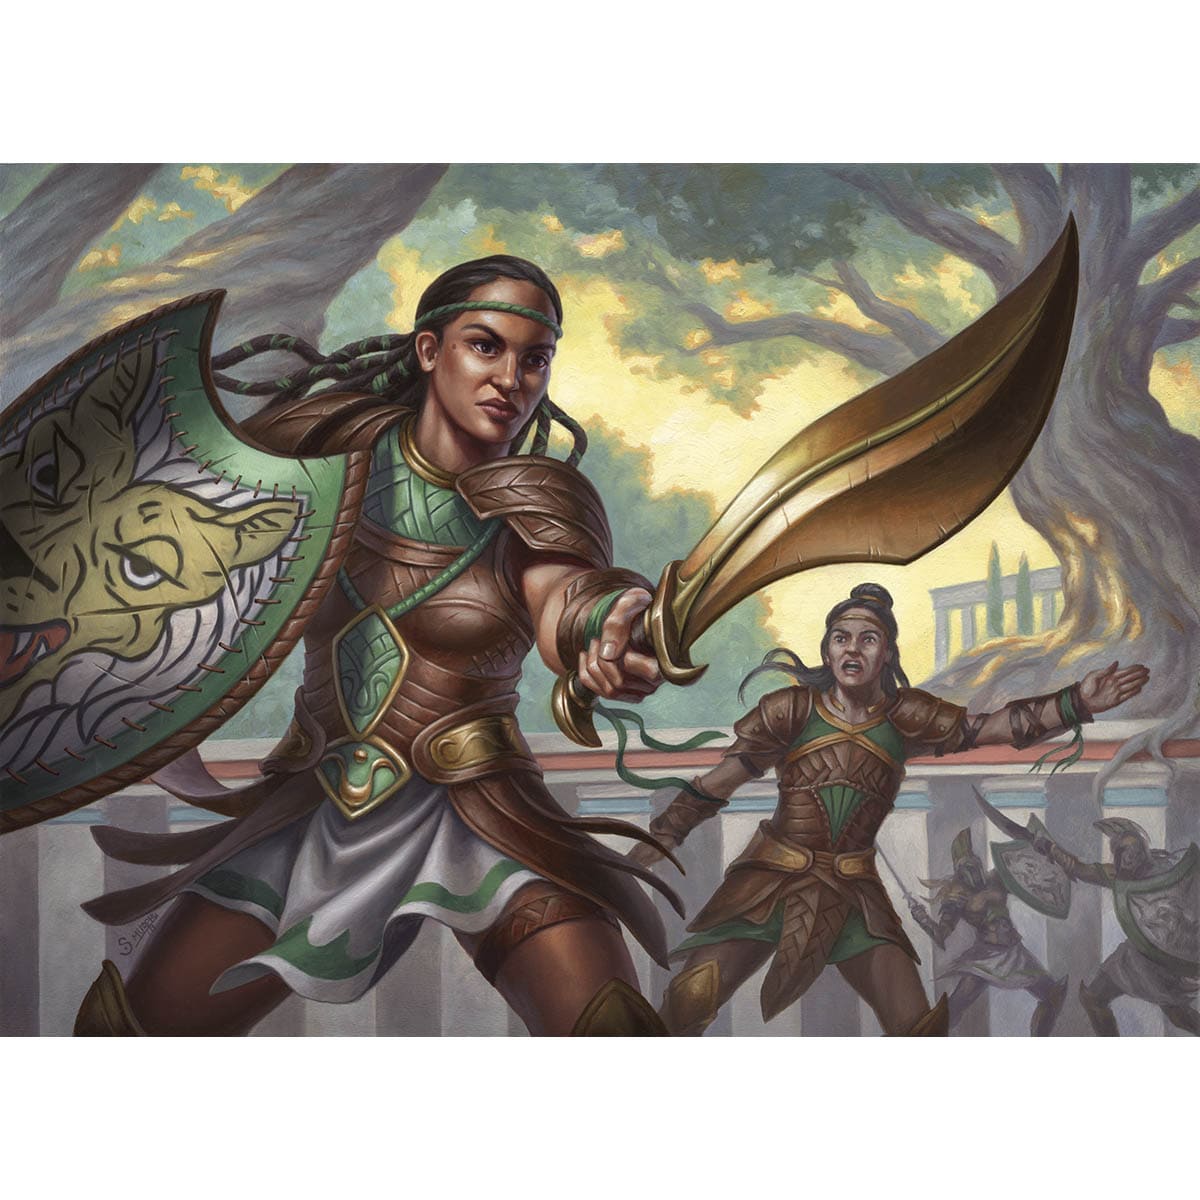 Setessan Training Print - Print - Original Magic Art - Accessories for Magic the Gathering and other card games